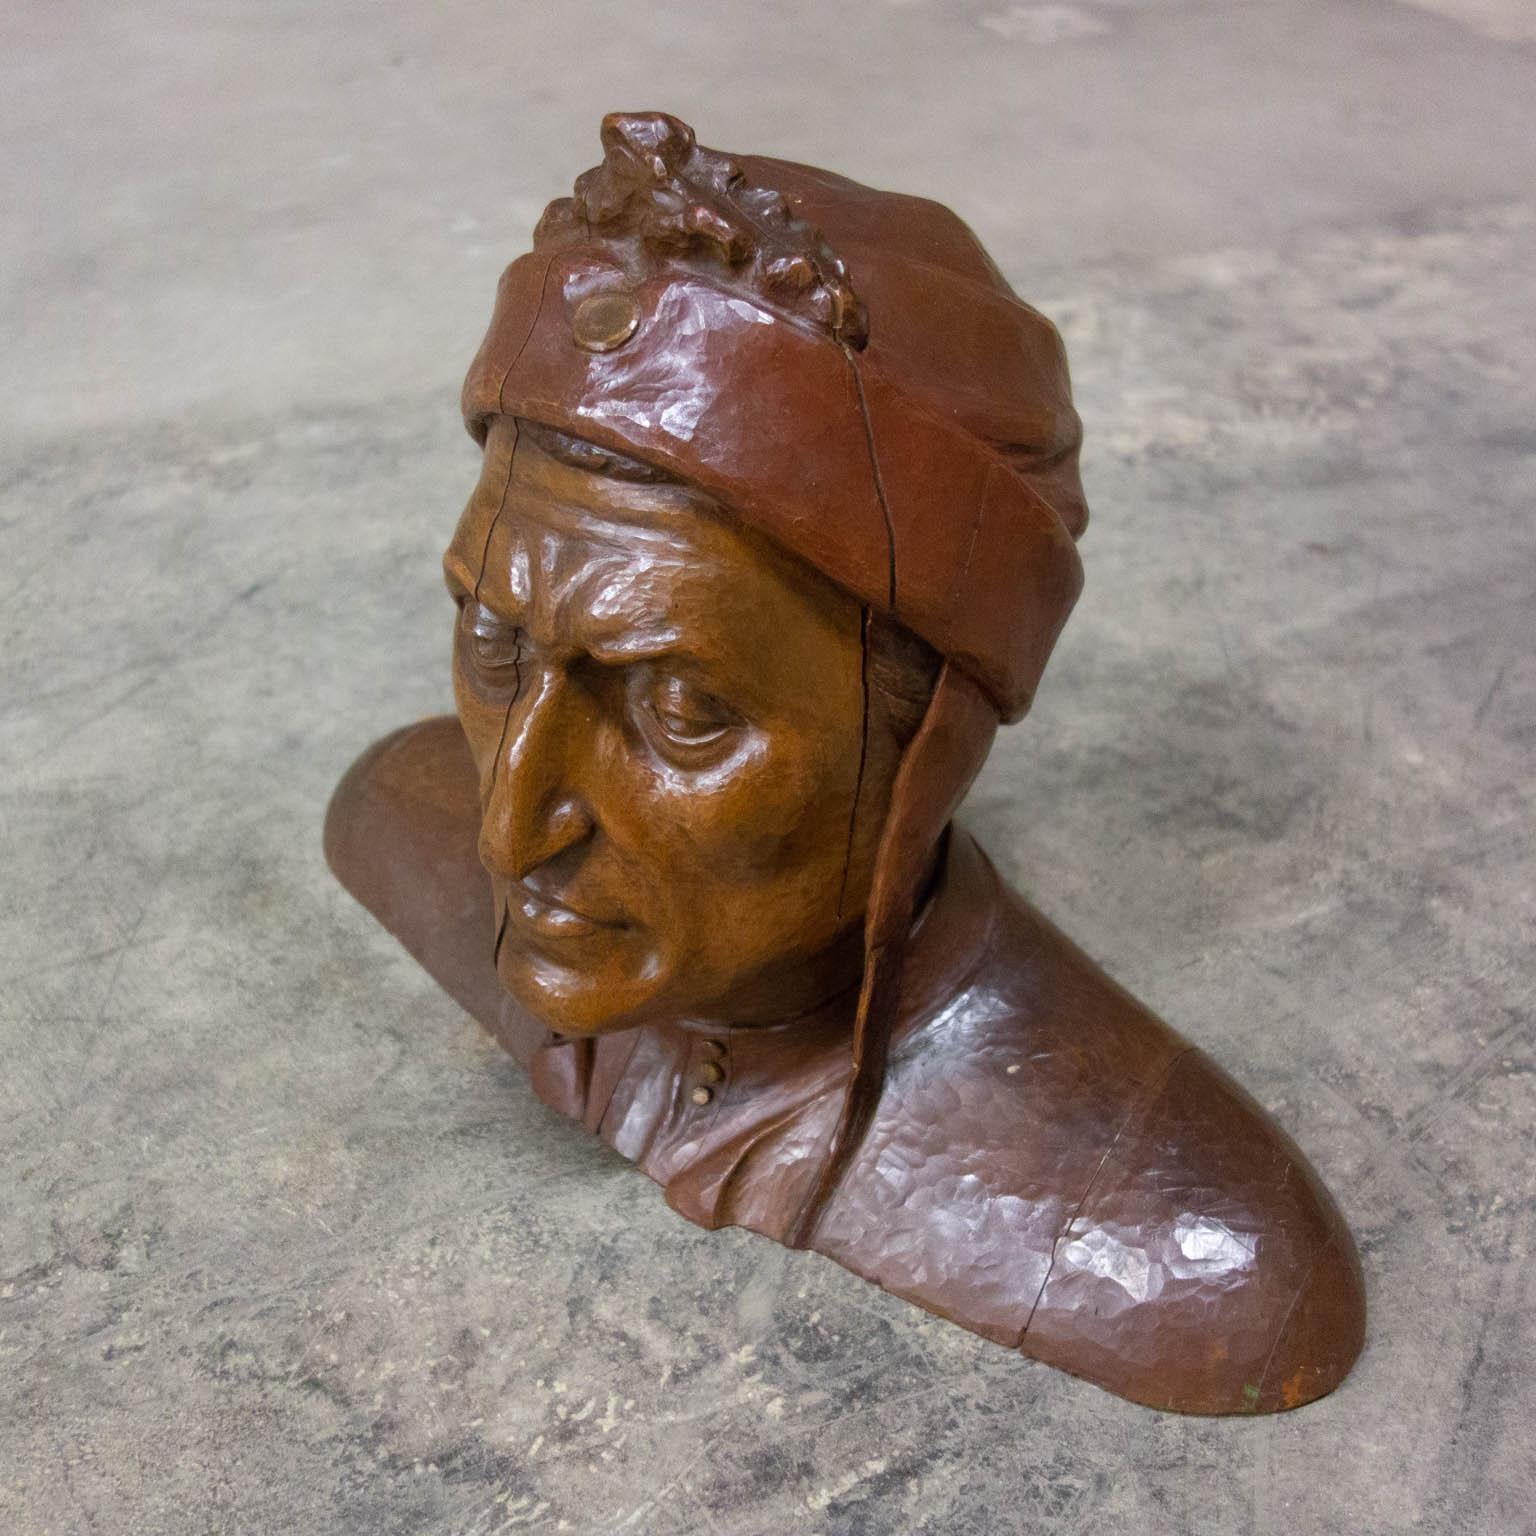 This portrait is a wonderful ode to Danté Alighieri, the world-famous poet and philosopher. The craftsman has patiently and skillfully brought out the clear contours of Danté's face from the wood. If you look closely, you can almost see with which